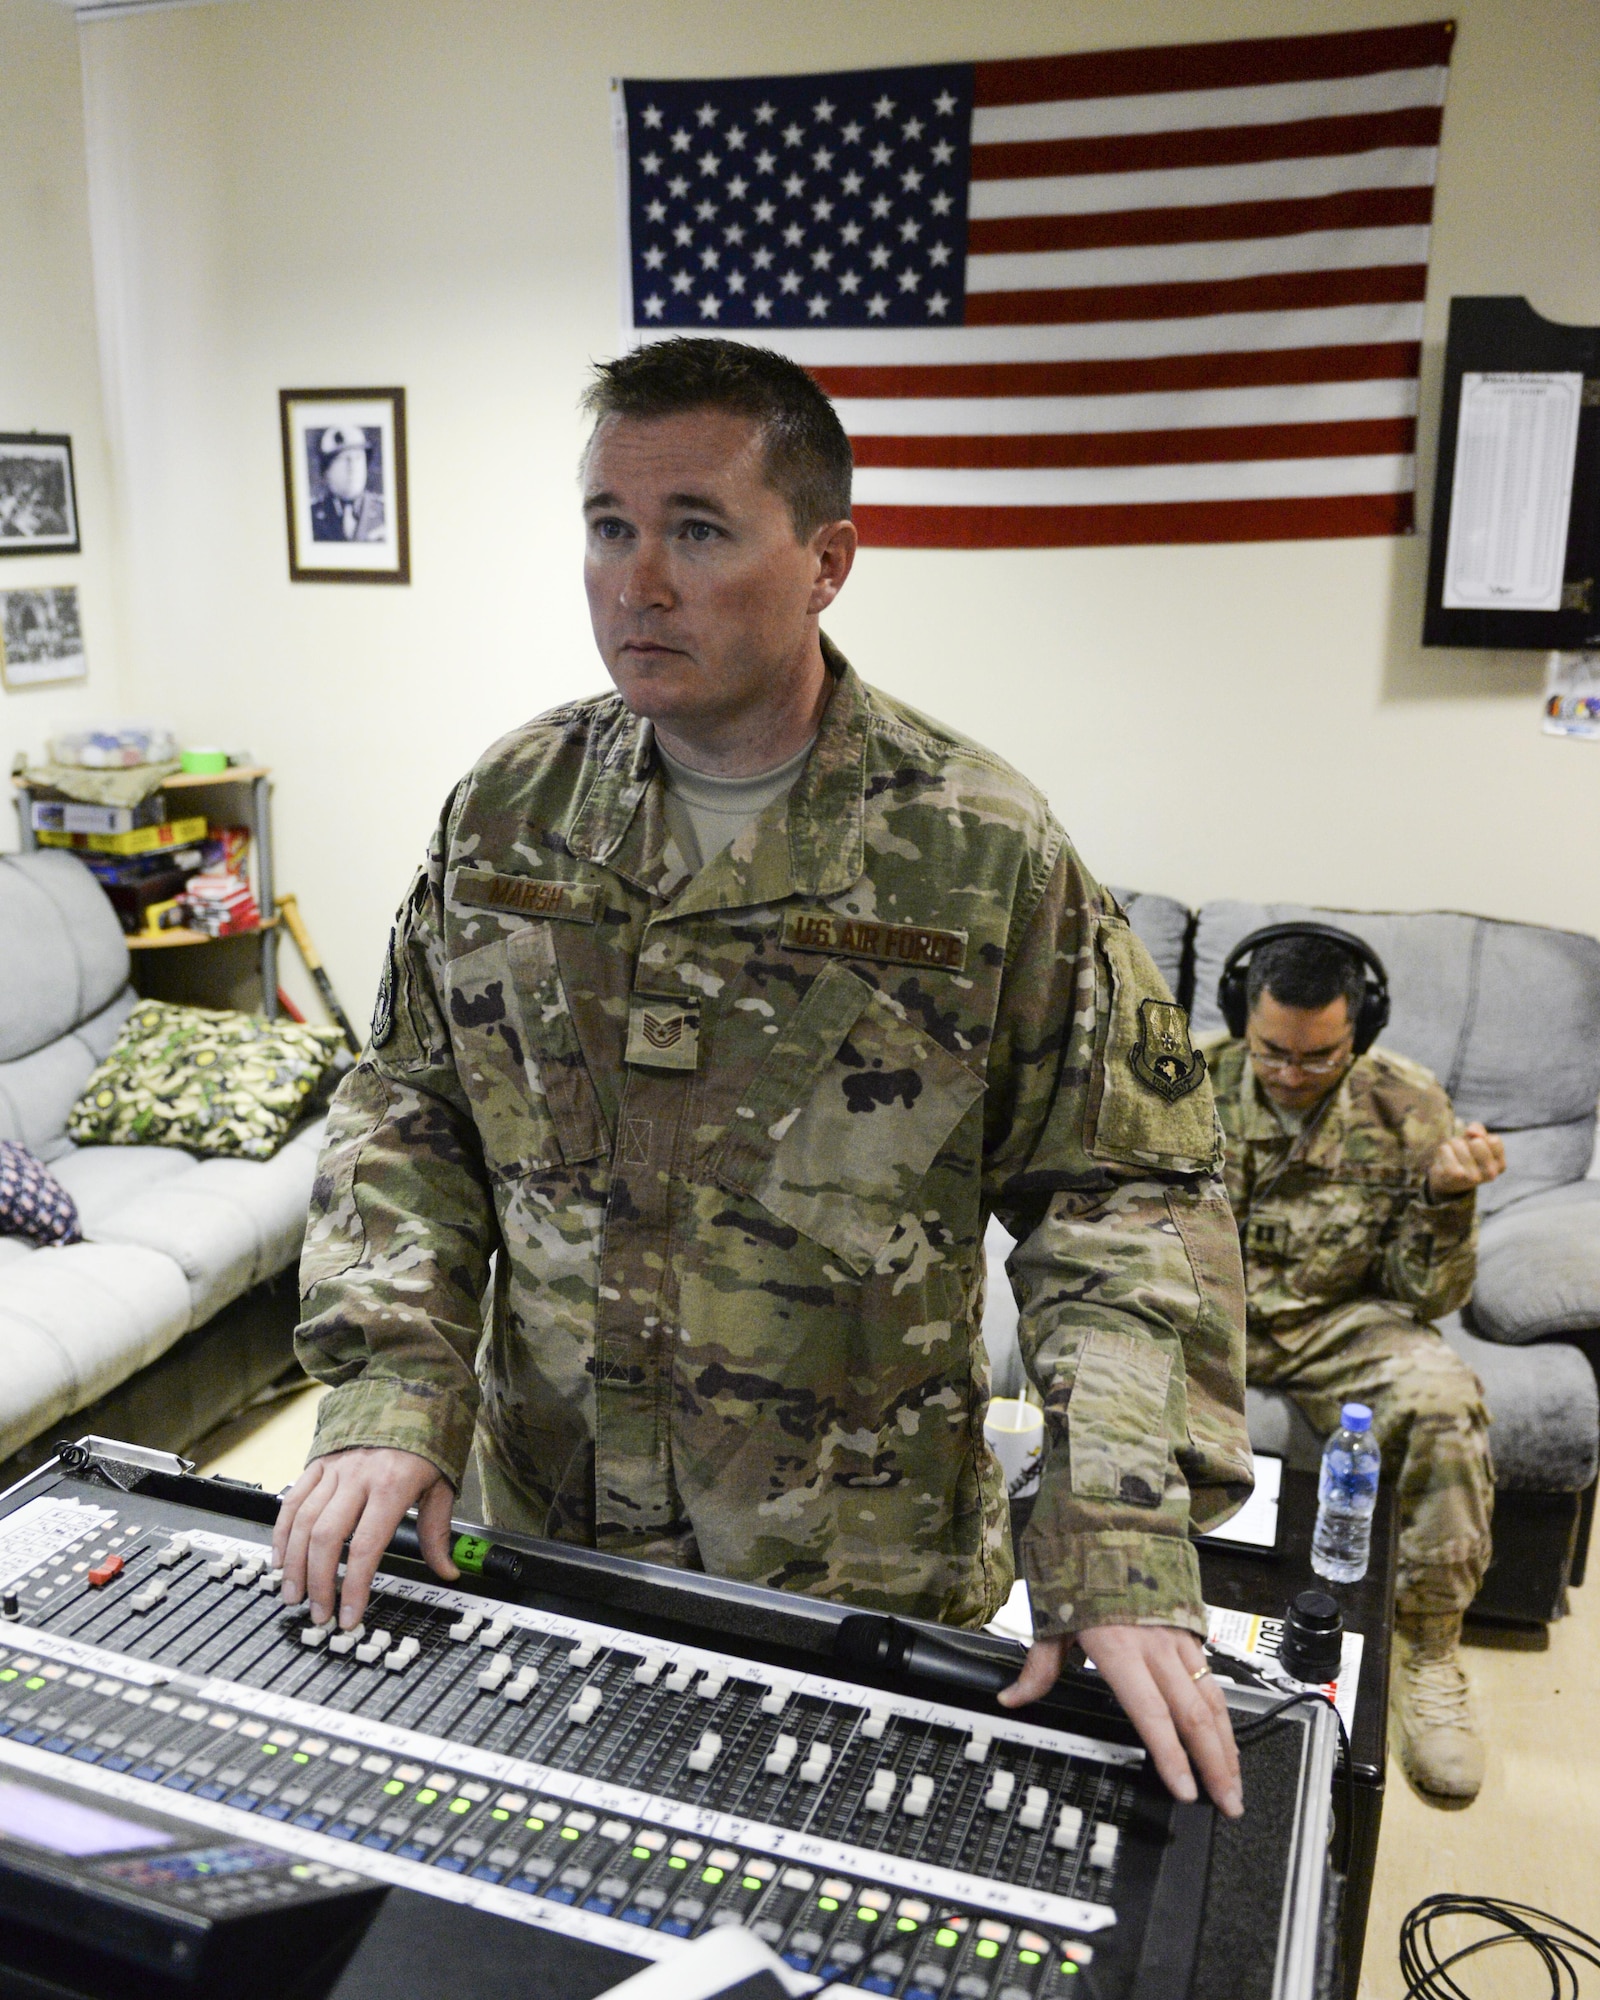 U.S. Air Force Tech. Sgt. John Marsh, audio engineer assigned to the Air Force Central Command Band, Touch-n-Go, adjusts sound levels during a recording session as the band recorded their punk rock rendition of the Air Force Song at Al Udeid, Air Force Base, Qatar, Sept. 21, 2017.